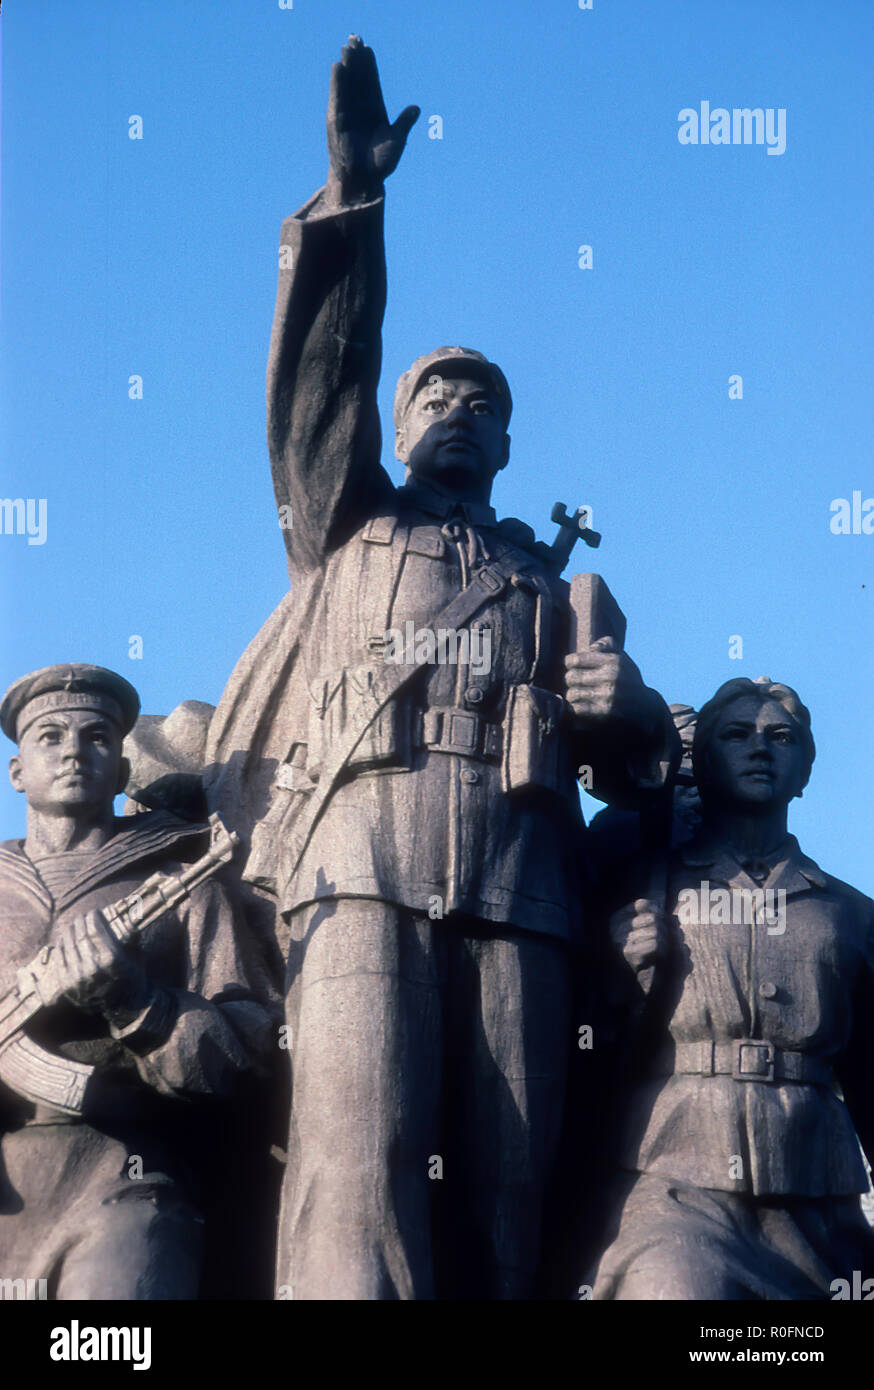 A statue depicting Chairman Mao as the heroic leader of the Chinese Revolution leading his people Stock Photo